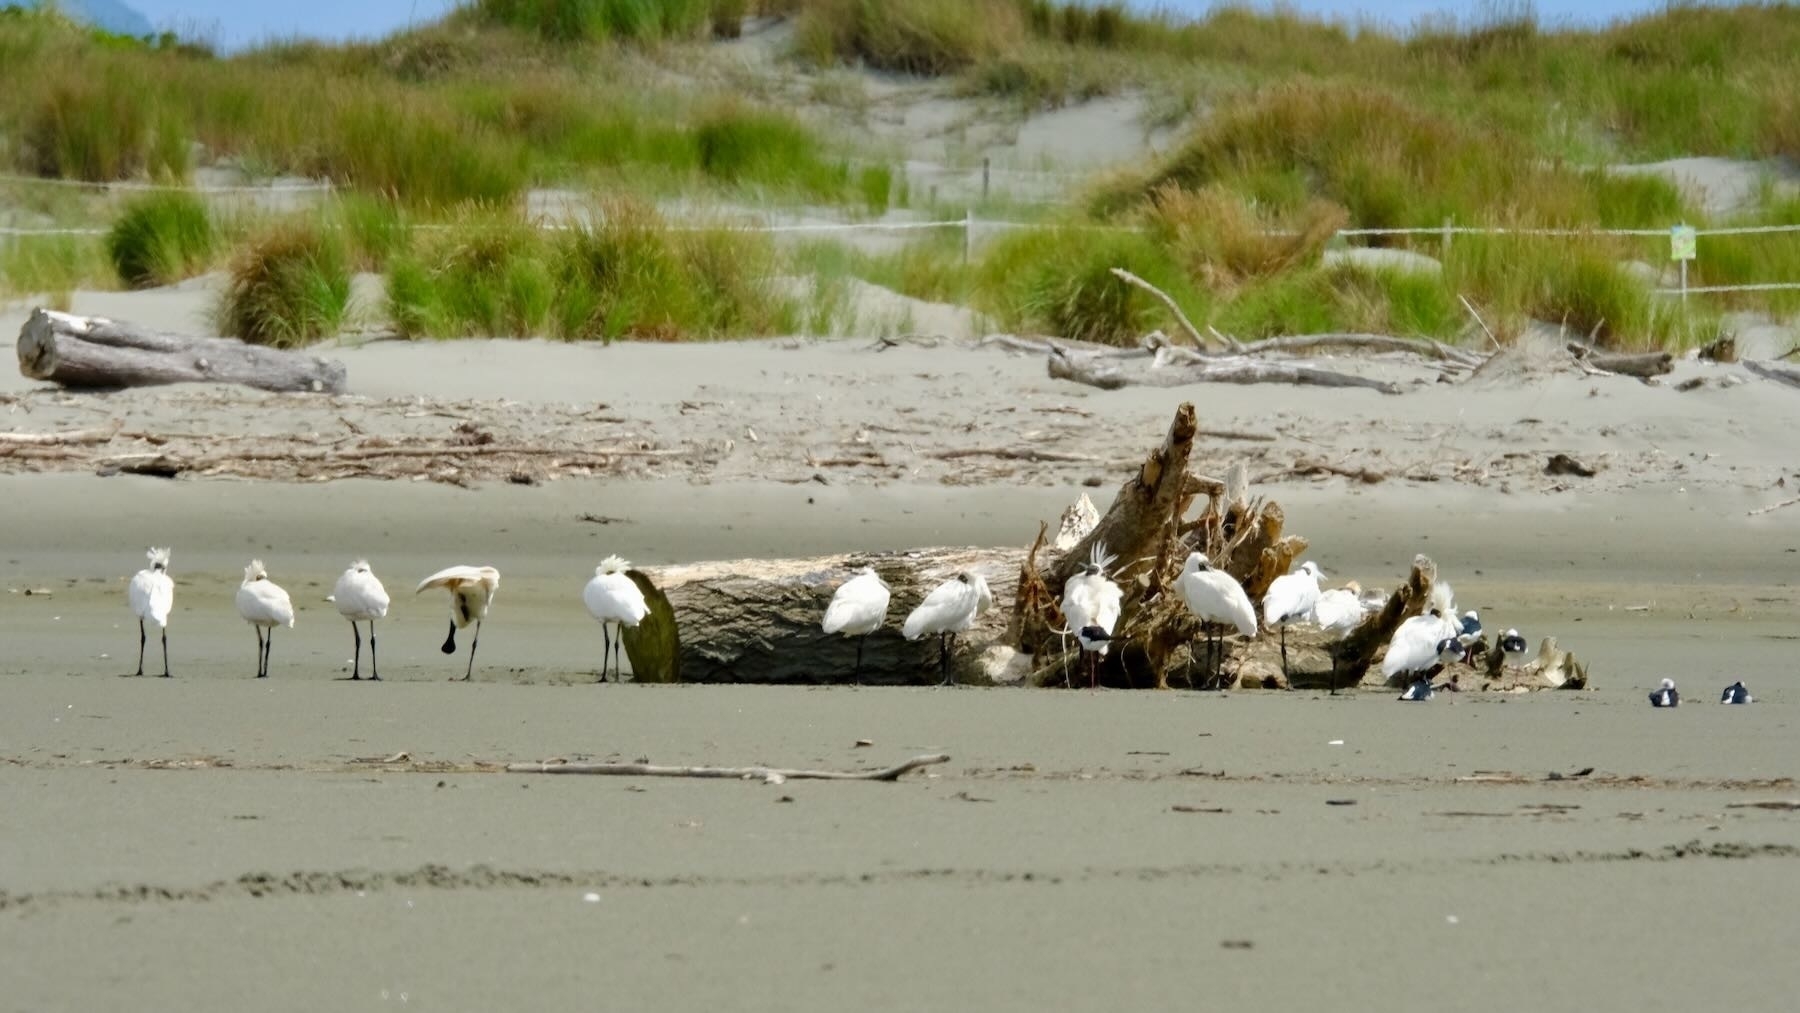 Flock of spoonbills sheltering behind driftwood - includes some Stilts. 